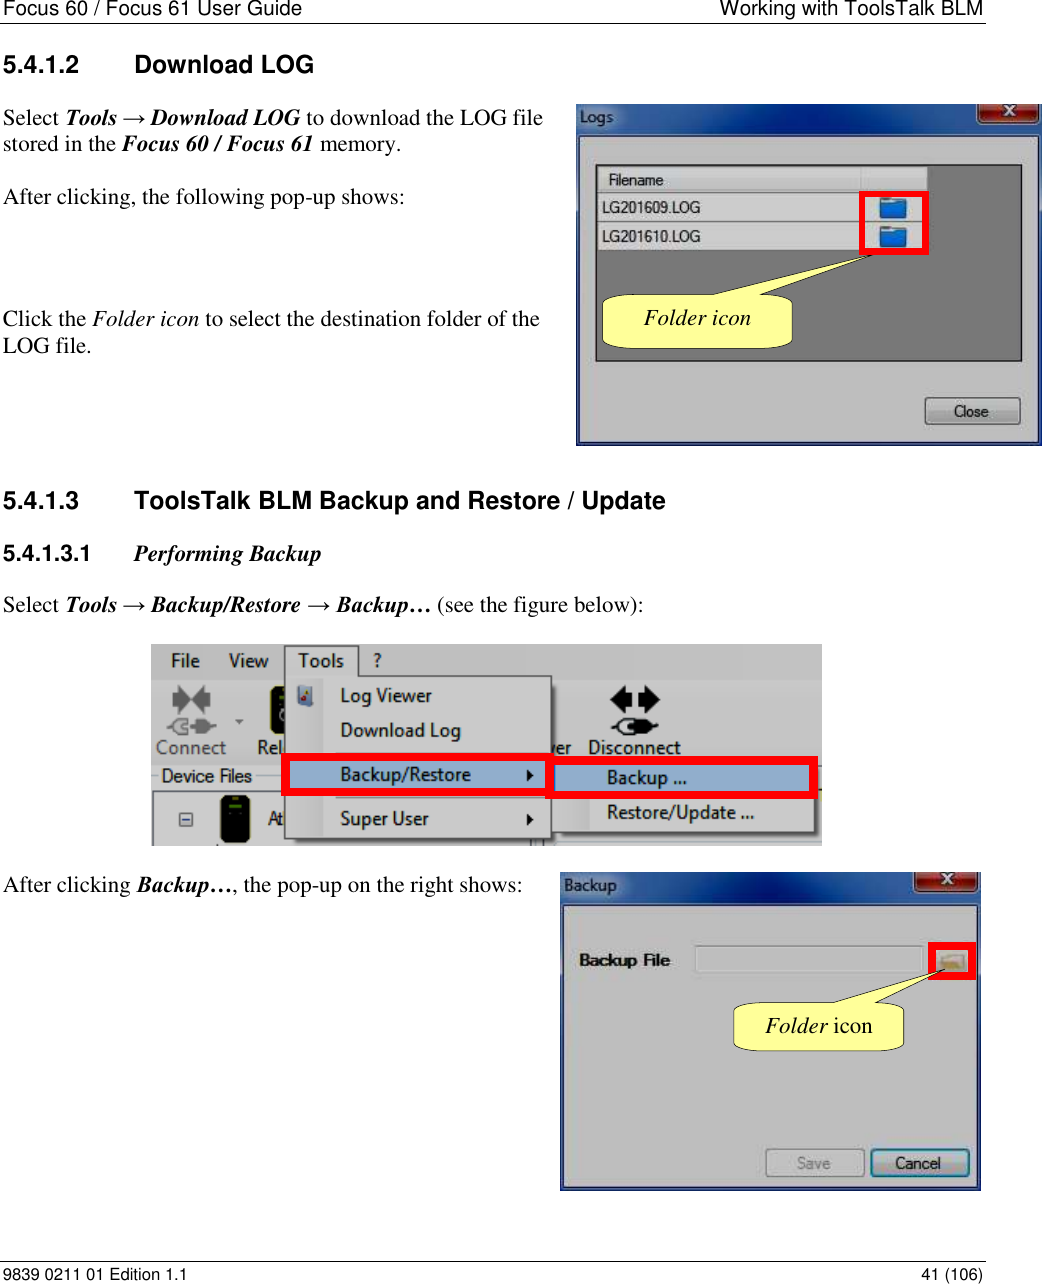 Focus 60 / Focus 61 User Guide  Working with ToolsTalk BLM 9839 0211 01 Edition 1.1    41 (106) 5.4.1.2  Download LOG  Select Tools → Download LOG to download the LOG file stored in the Focus 60 / Focus 61 memory.  After clicking, the following pop-up shows:   Click the Folder icon to select the destination folder of the LOG file.   5.4.1.3  ToolsTalk BLM Backup and Restore / Update 5.4.1.3.1  Performing Backup Select Tools → Backup/Restore → Backup… (see the figure below):   After clicking Backup…, the pop-up on the right shows:           Folder icon Folder icon 